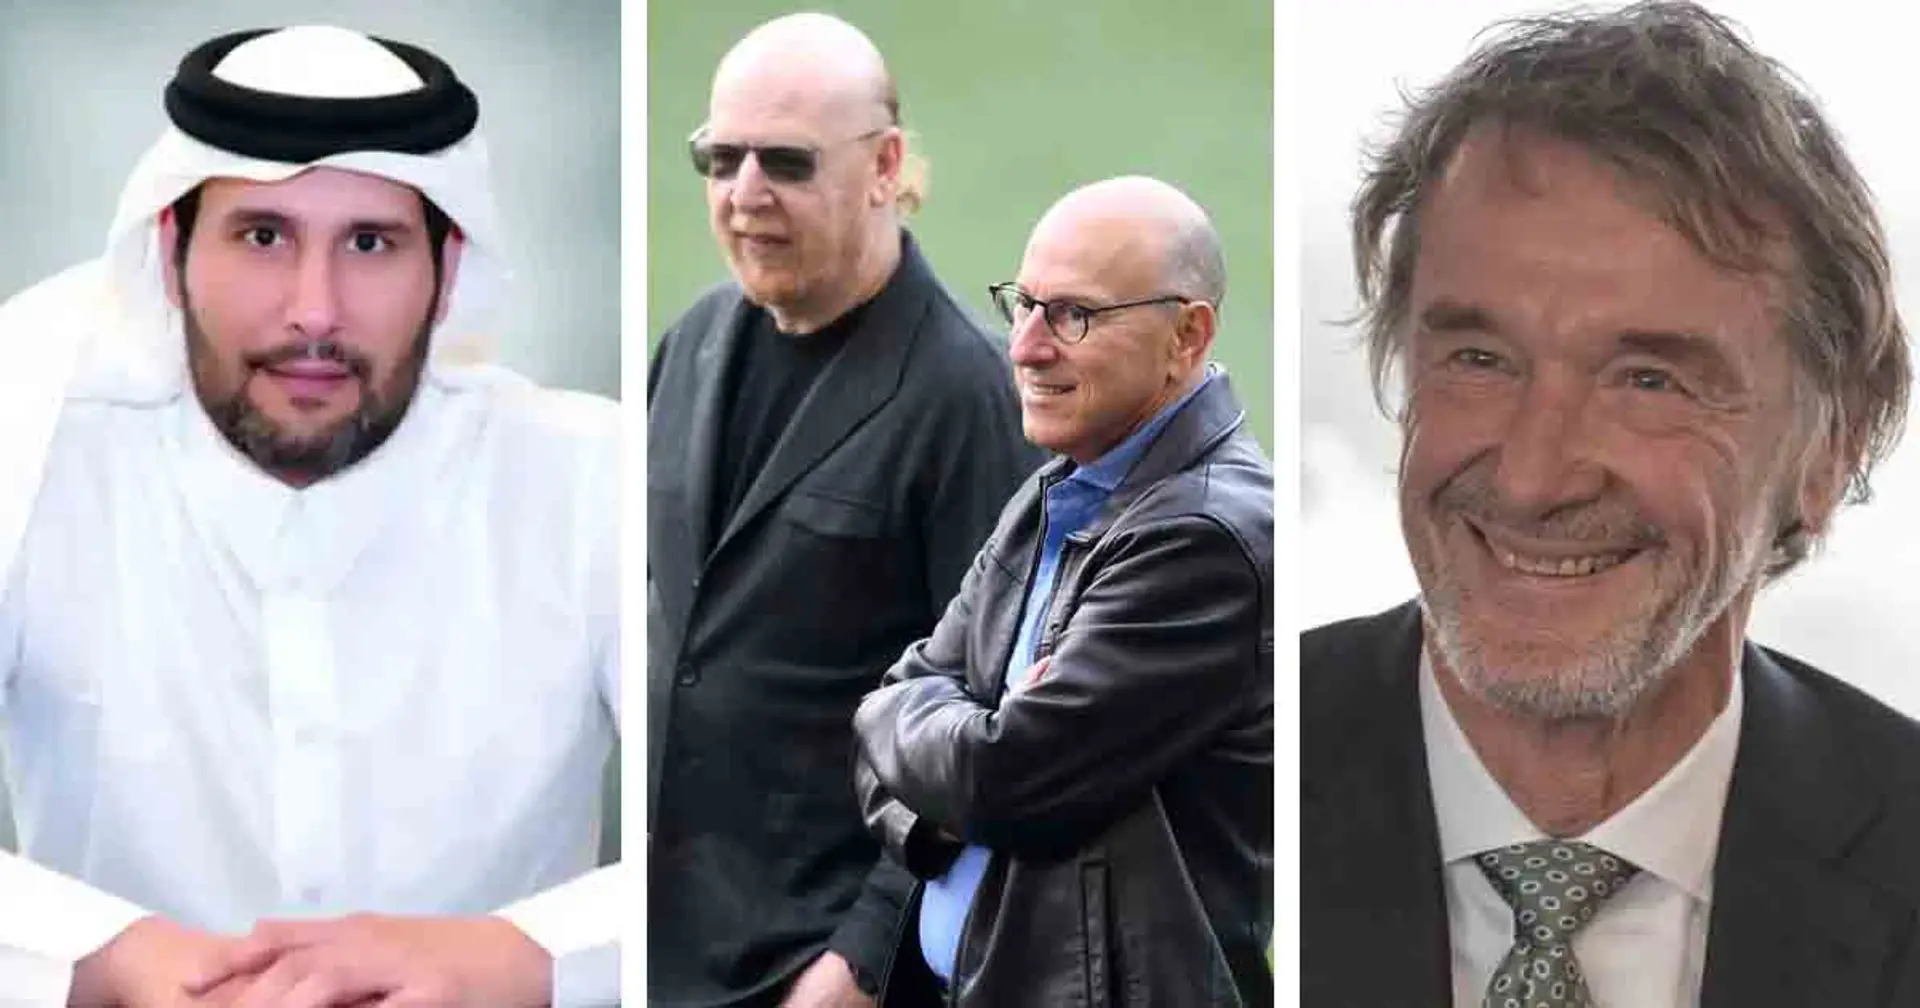 Sheikh Jassim and Sir Jim submit record bids to buy United - Glazers stance revealed